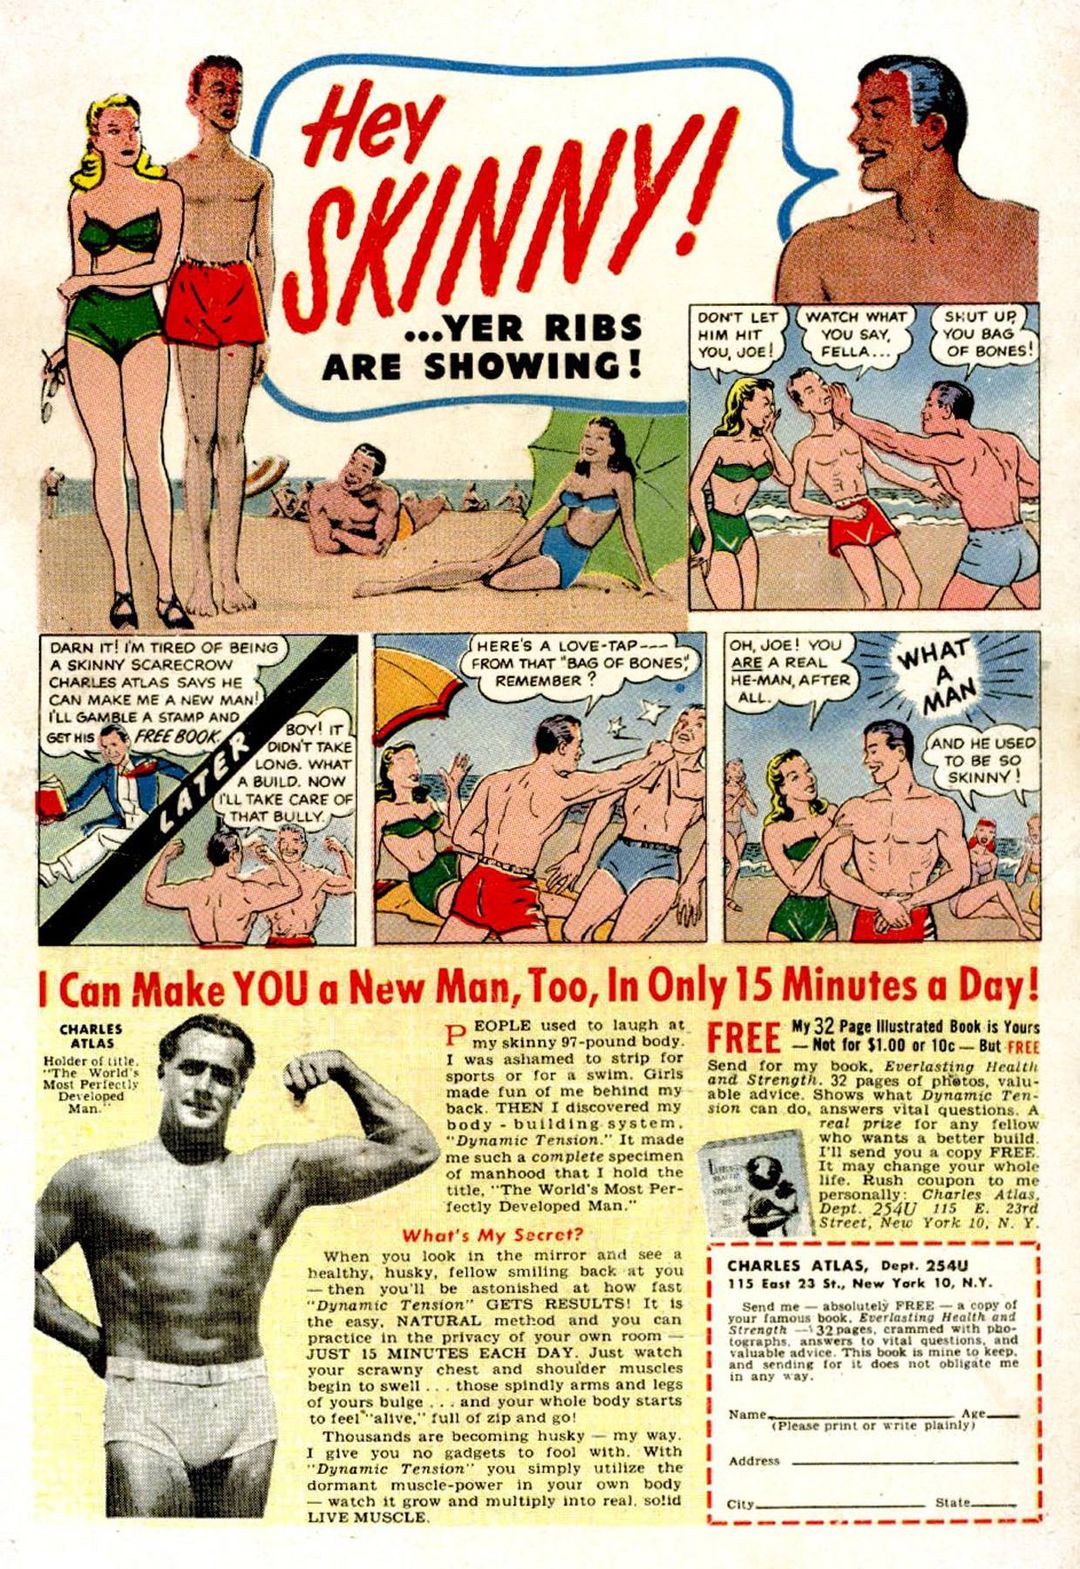 Who Remembers Charles Atlas Ads in Comix?